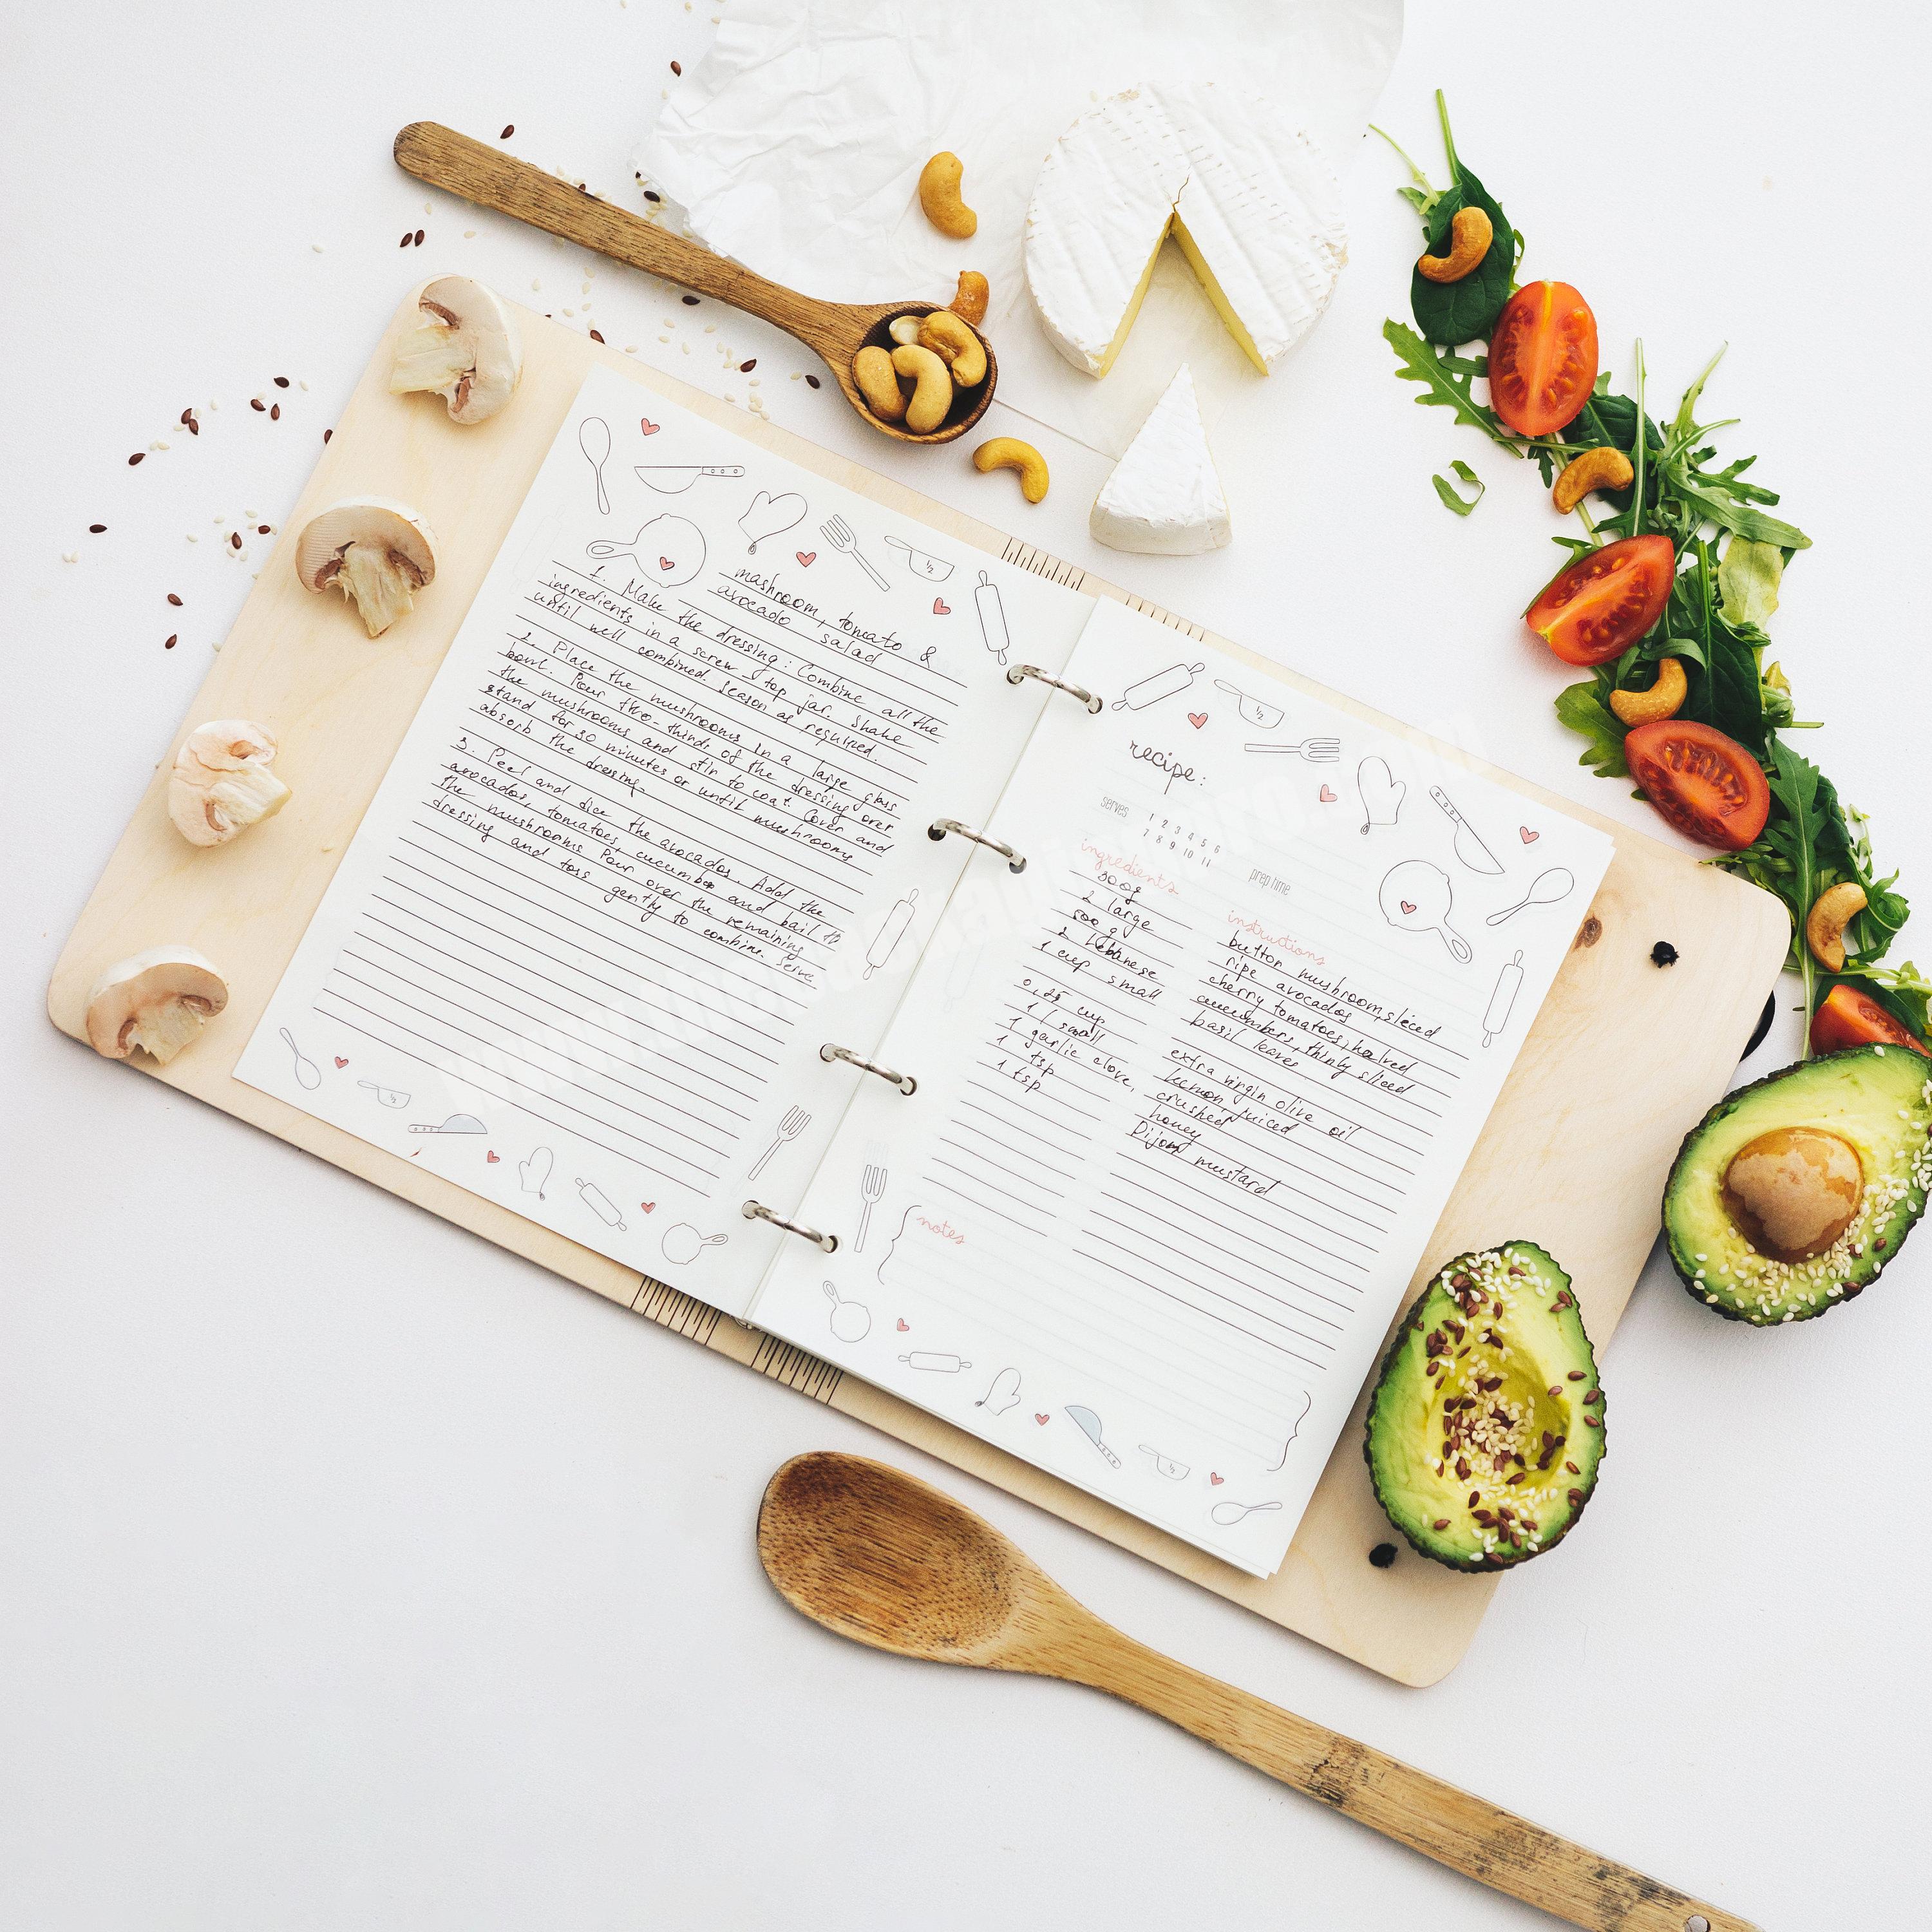 https://thepackagingpro.com/media/images/product/2023/5/Personalized-Cook-Book-Wooden-Note-Book-Wood-Custom-Journal-Recipe-Book-For-Family_Uv5ItJp.jpg